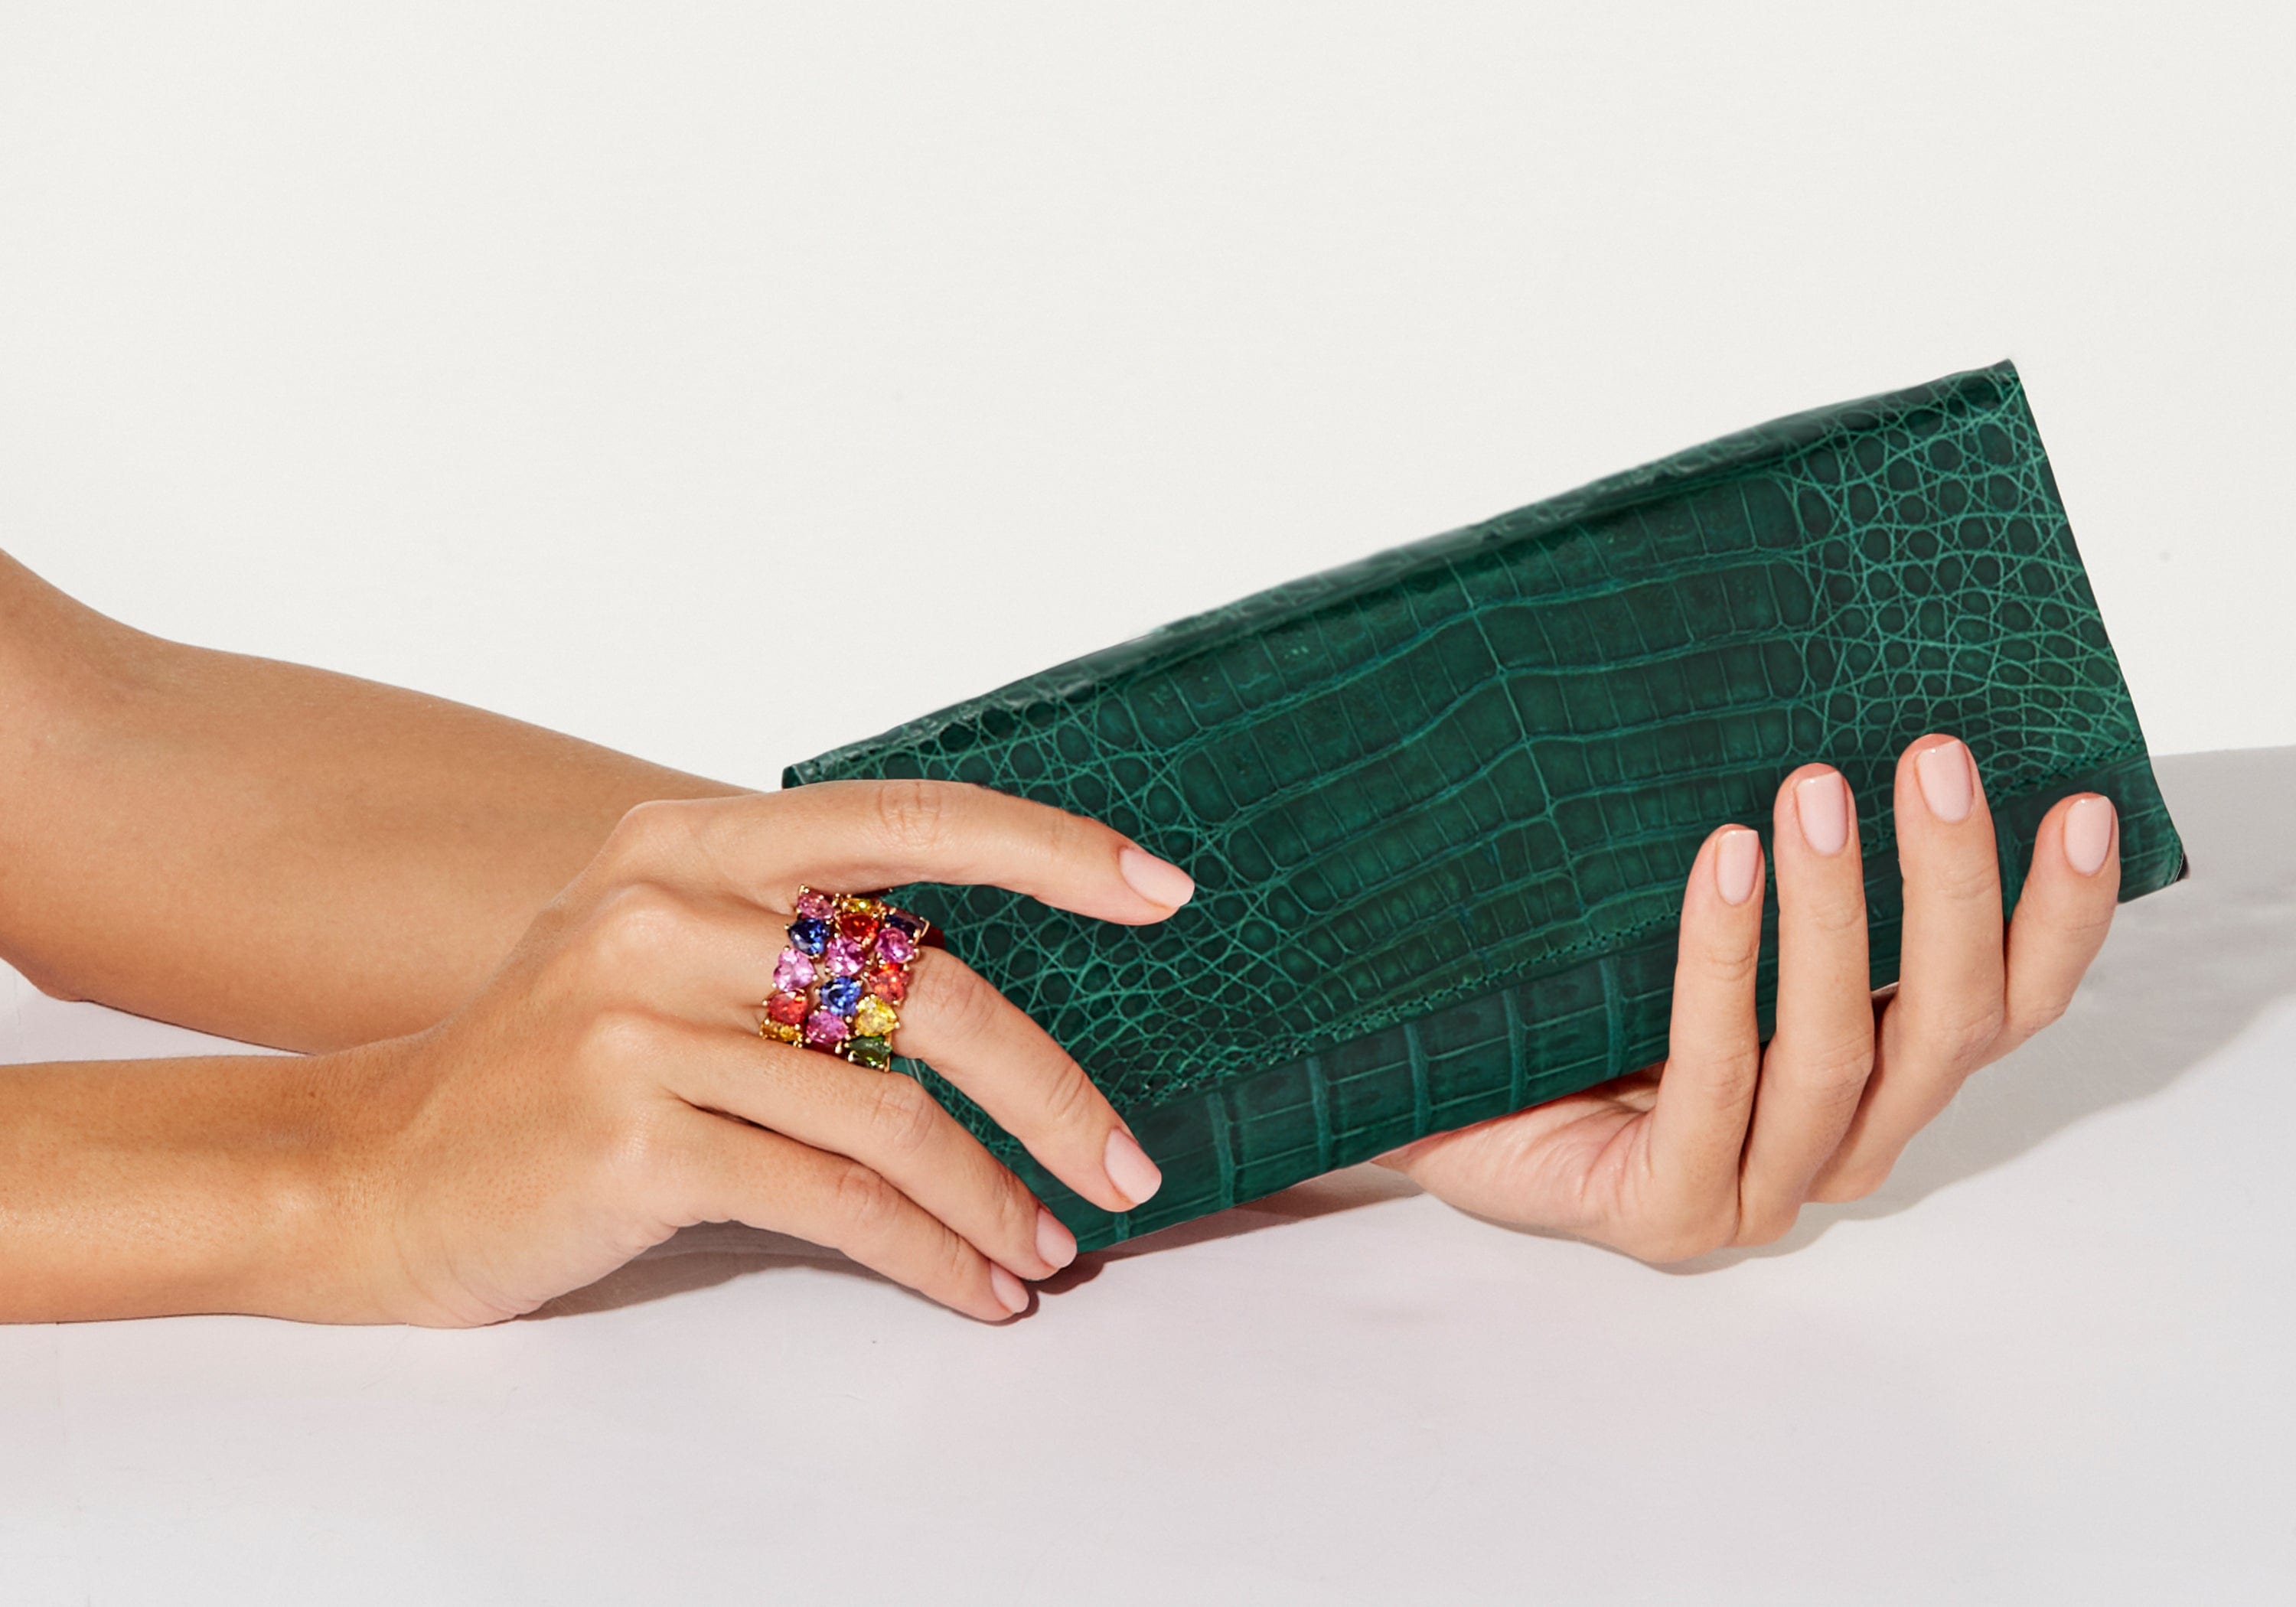 Rounded Clutch - Emerald Green Alligator